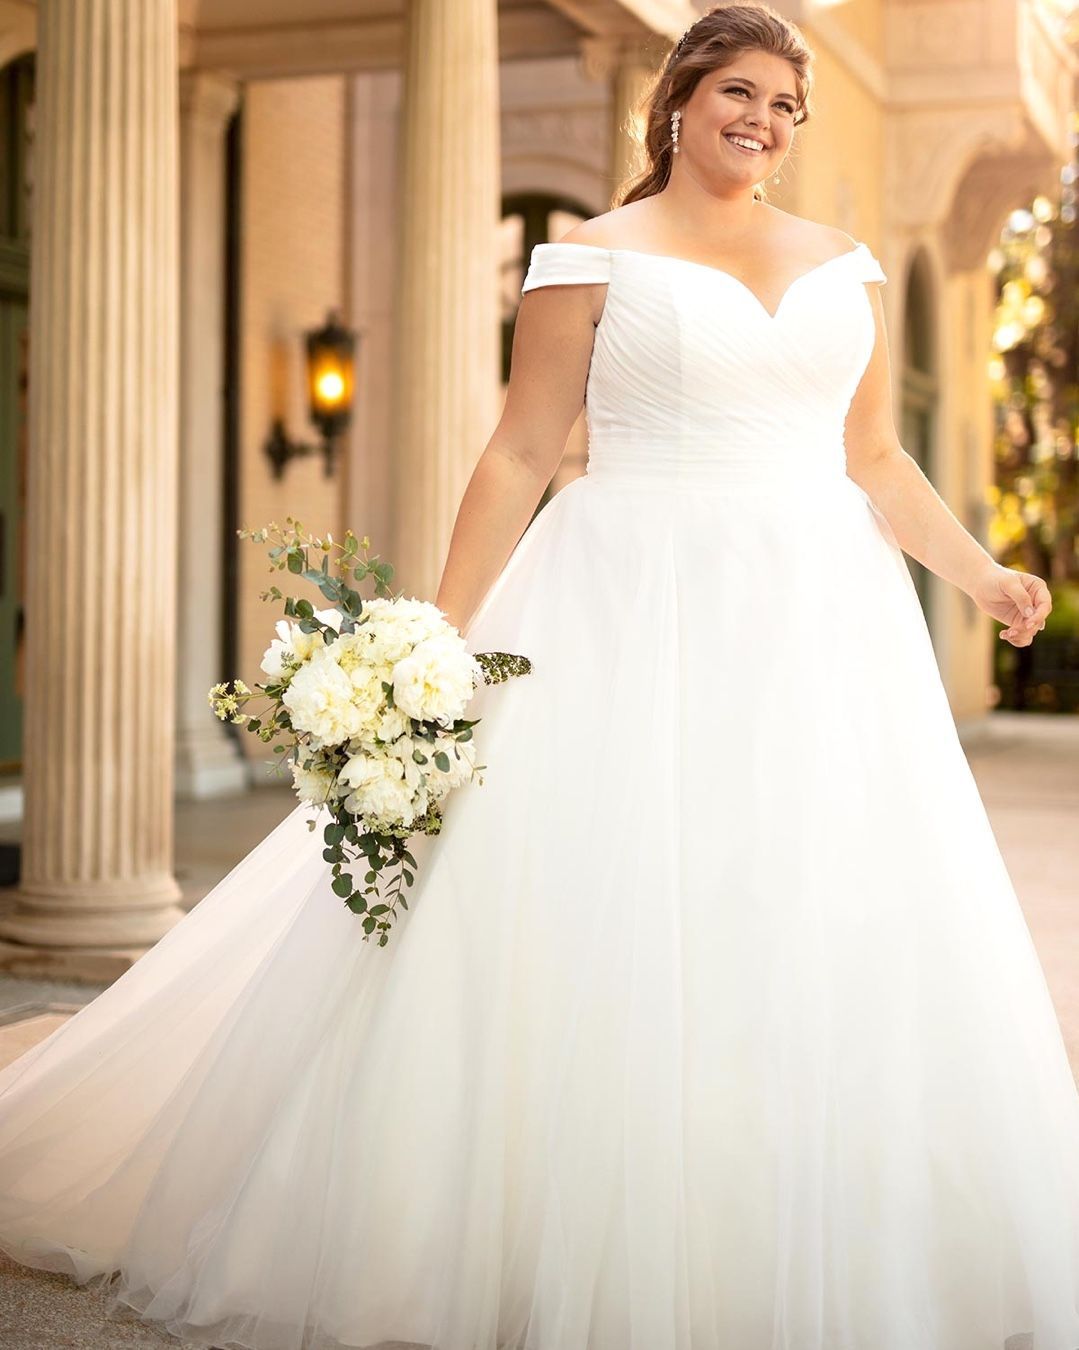 How Much Does A Wedding Gown Cost In 2020 Wedding Gowns Wedding